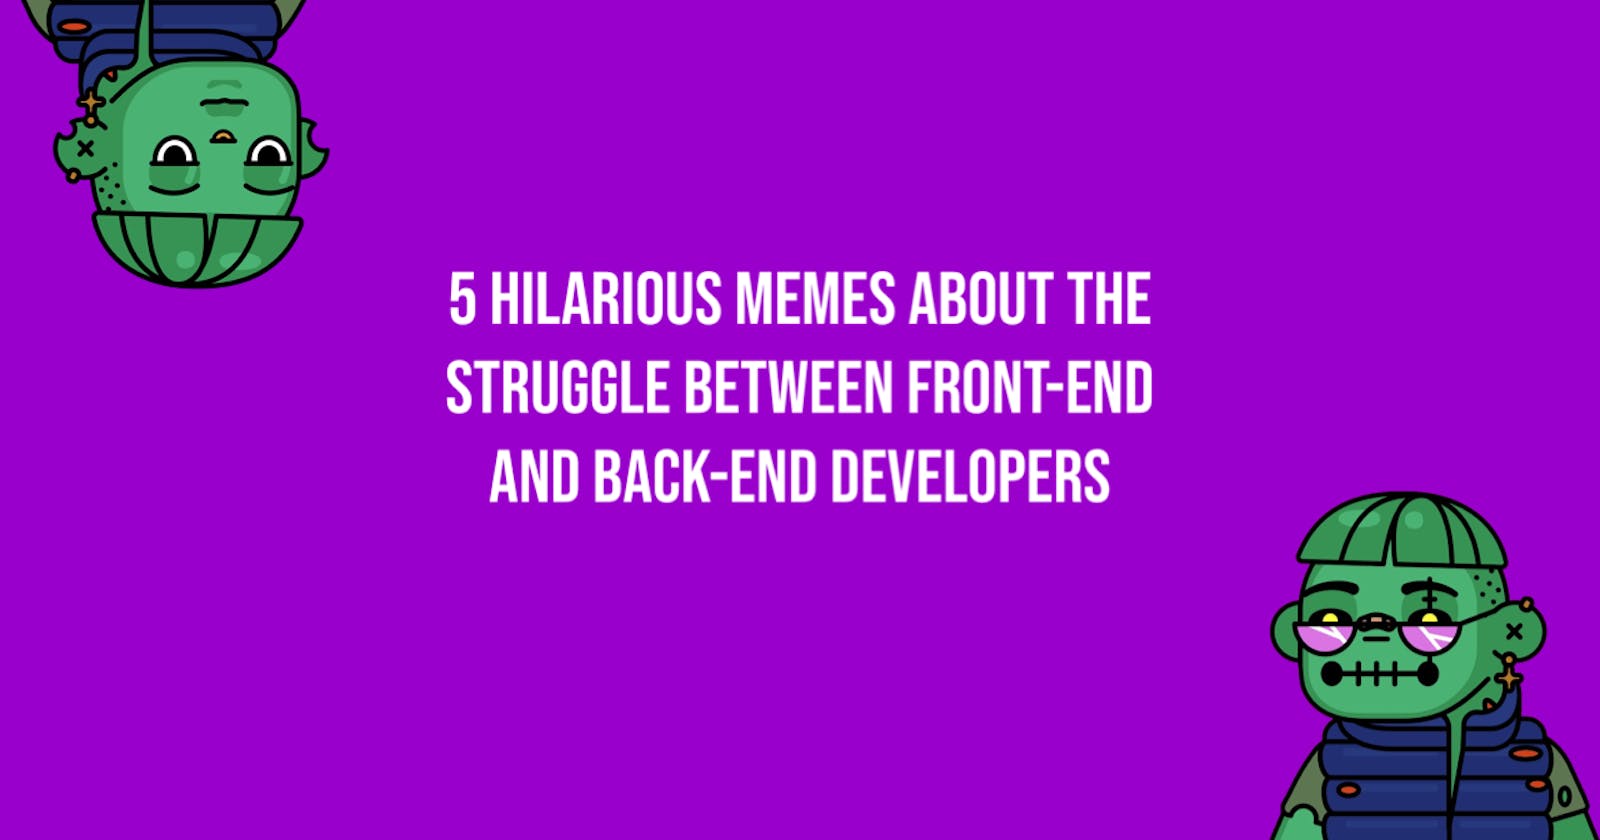 5 Hilarious Memes About The Struggle Between Front-End And Back-End Developers